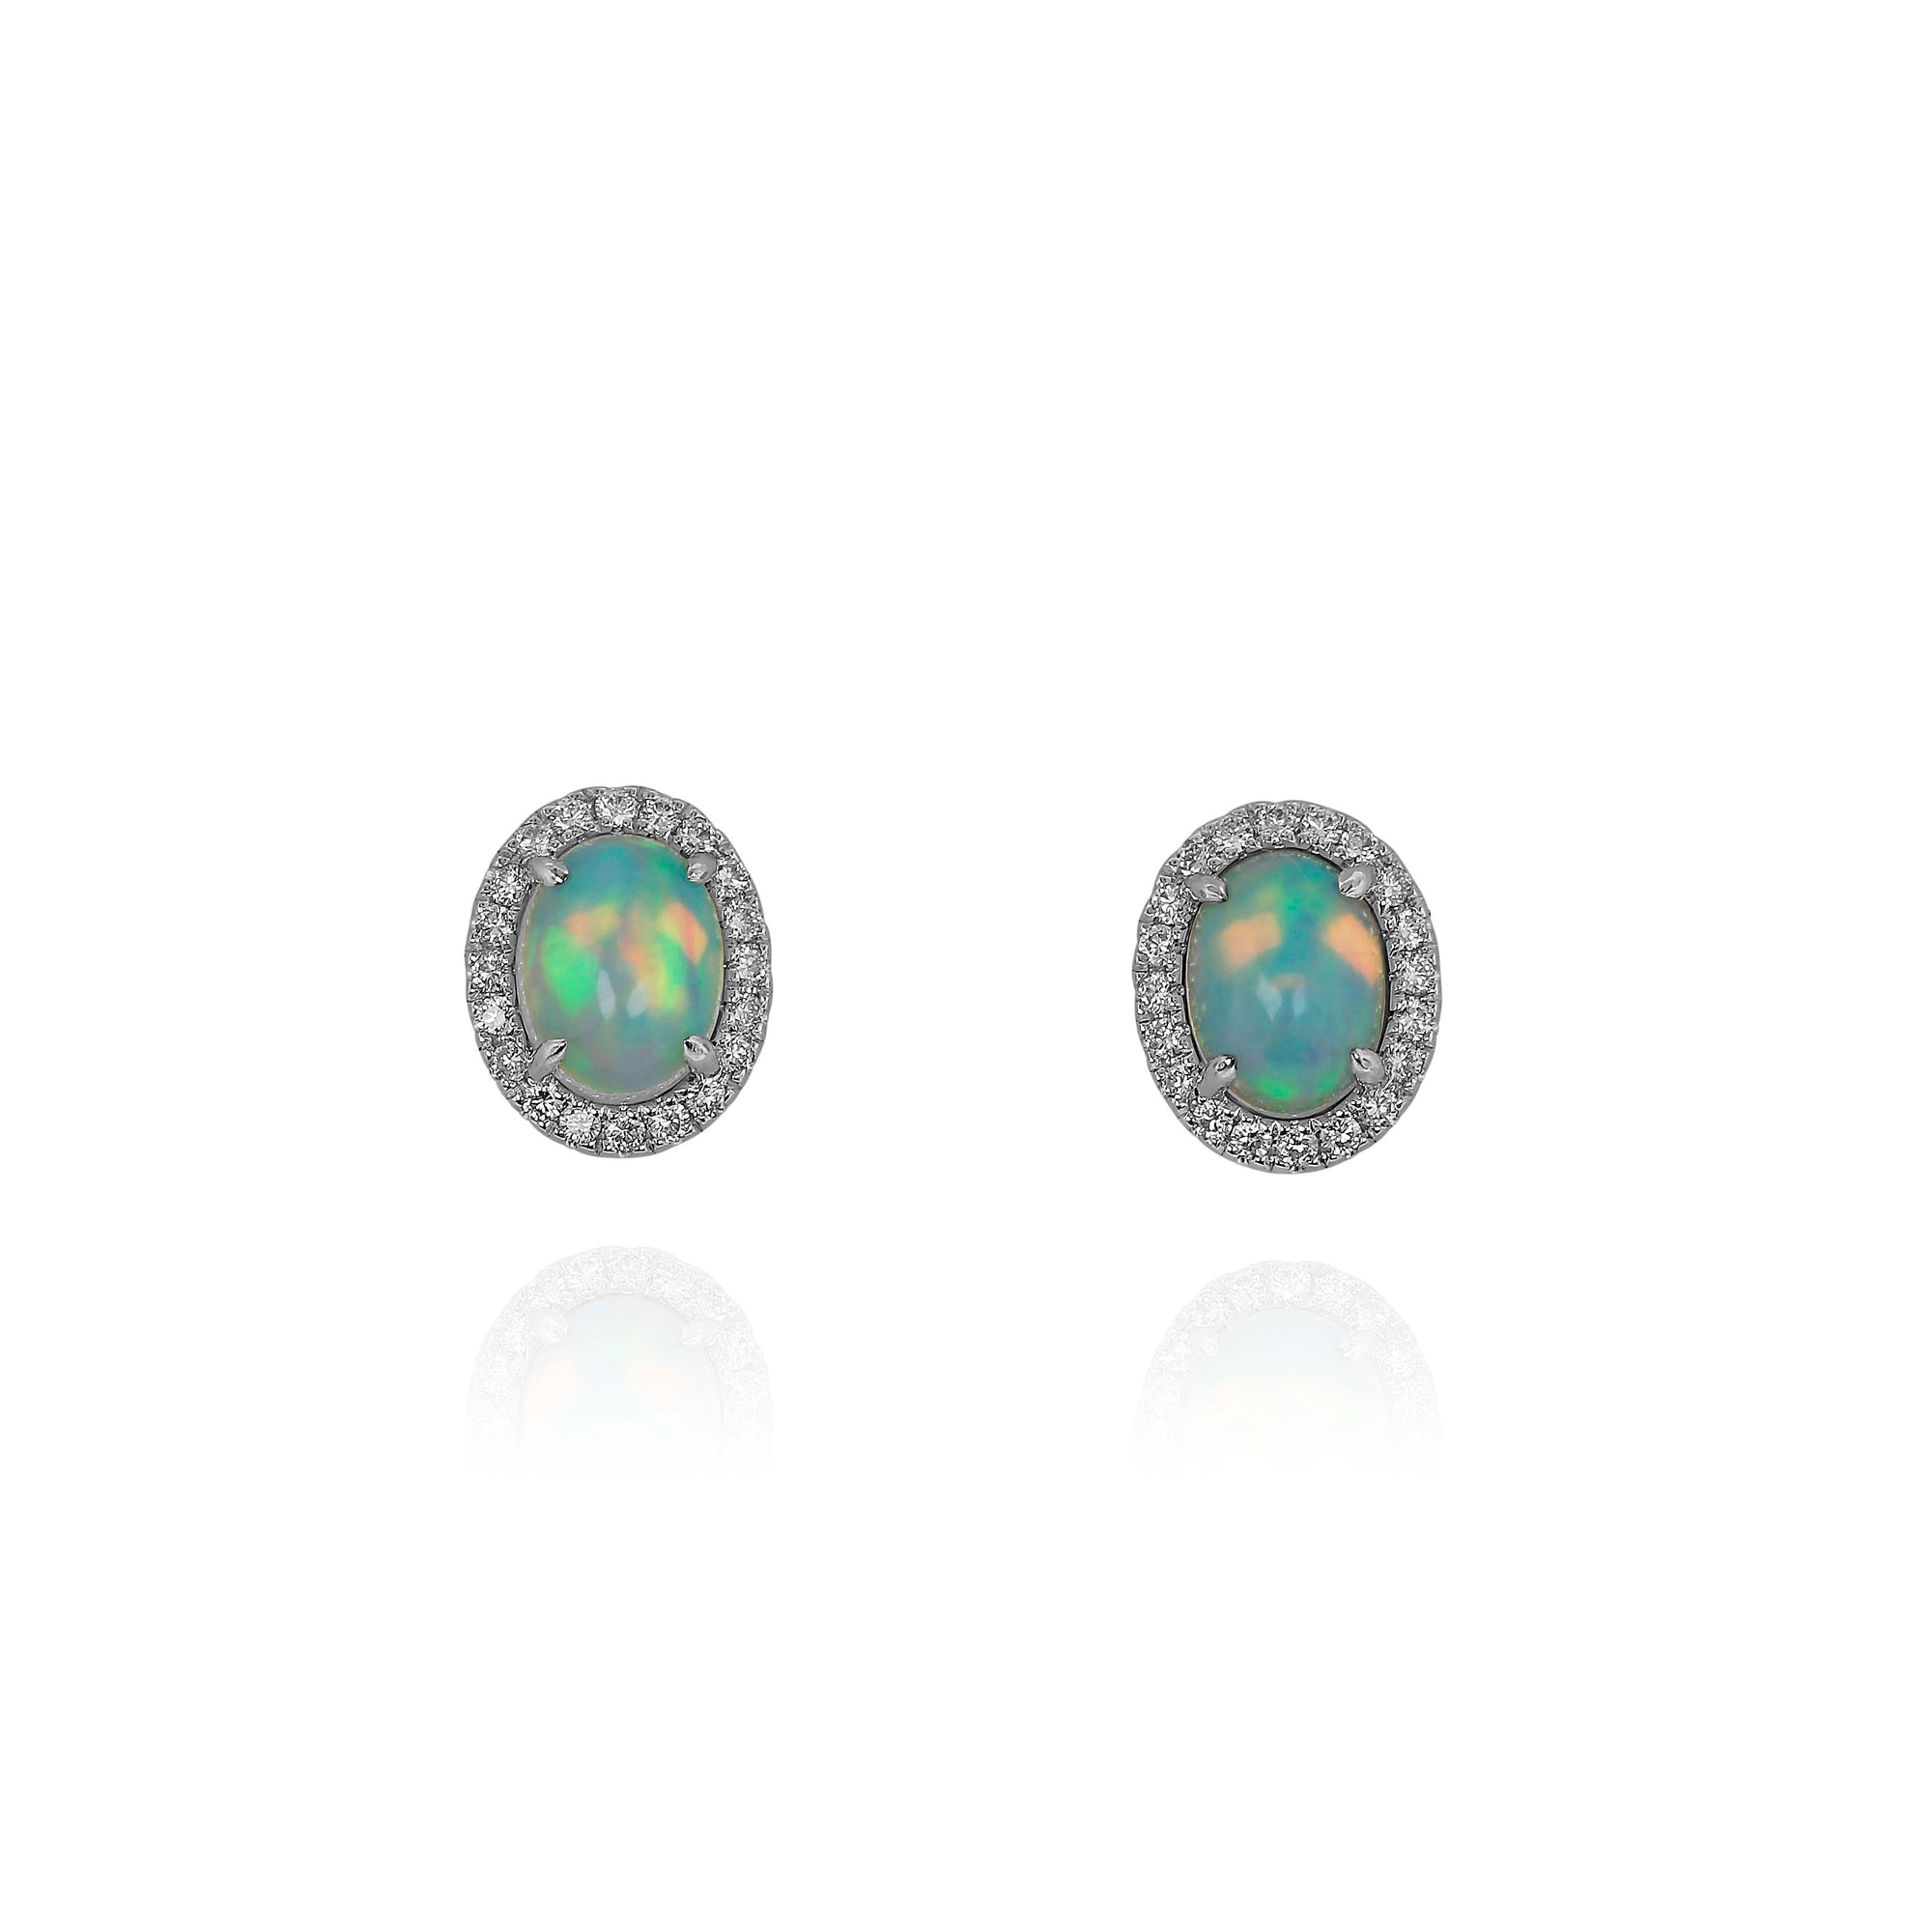 Opal and Diamond Stud Earrings by Yael - White Gold - Talisman Collection Fine Jewelers